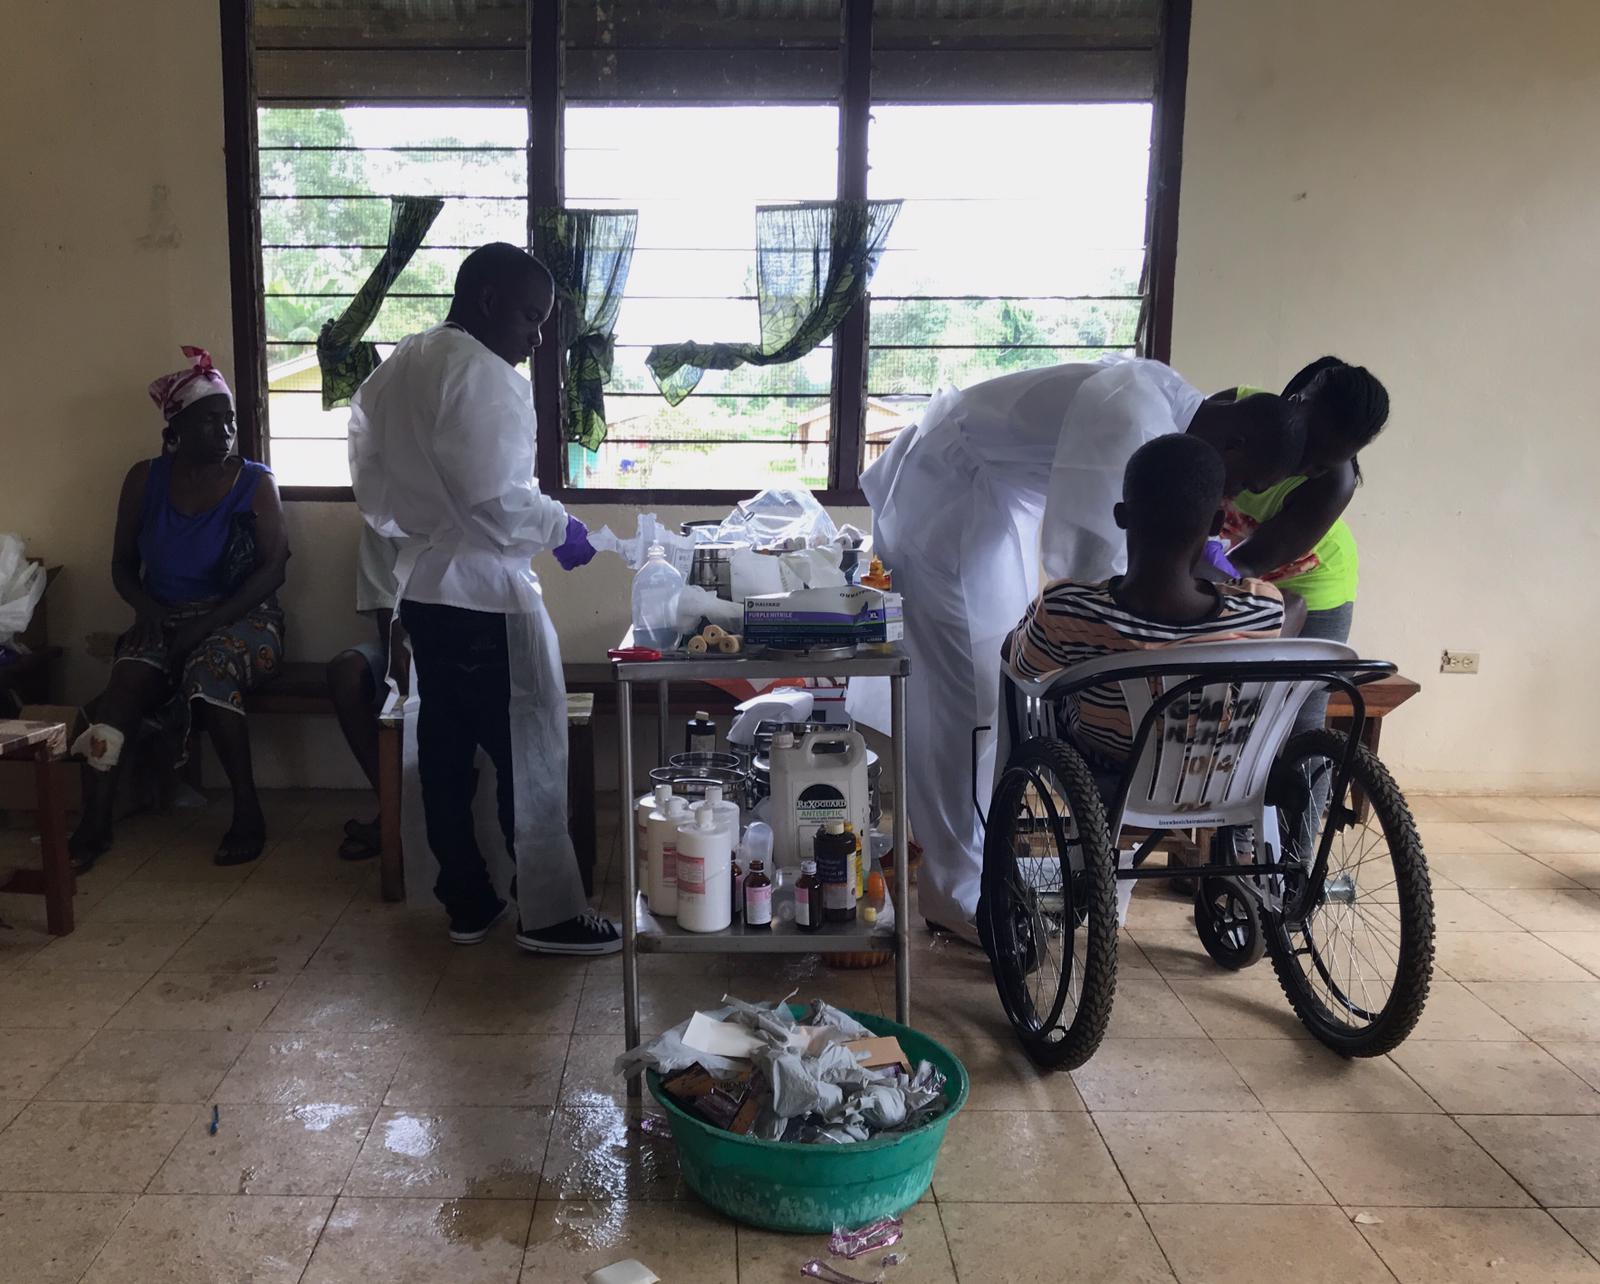 Nurses clean the wounds of a man affected by Buruli ulcer who recently arrived from the community after receiving traditional medicine with no improvement. A family member helps to keep the patient still while nurses remove mud and leaves to clean the ulcers.